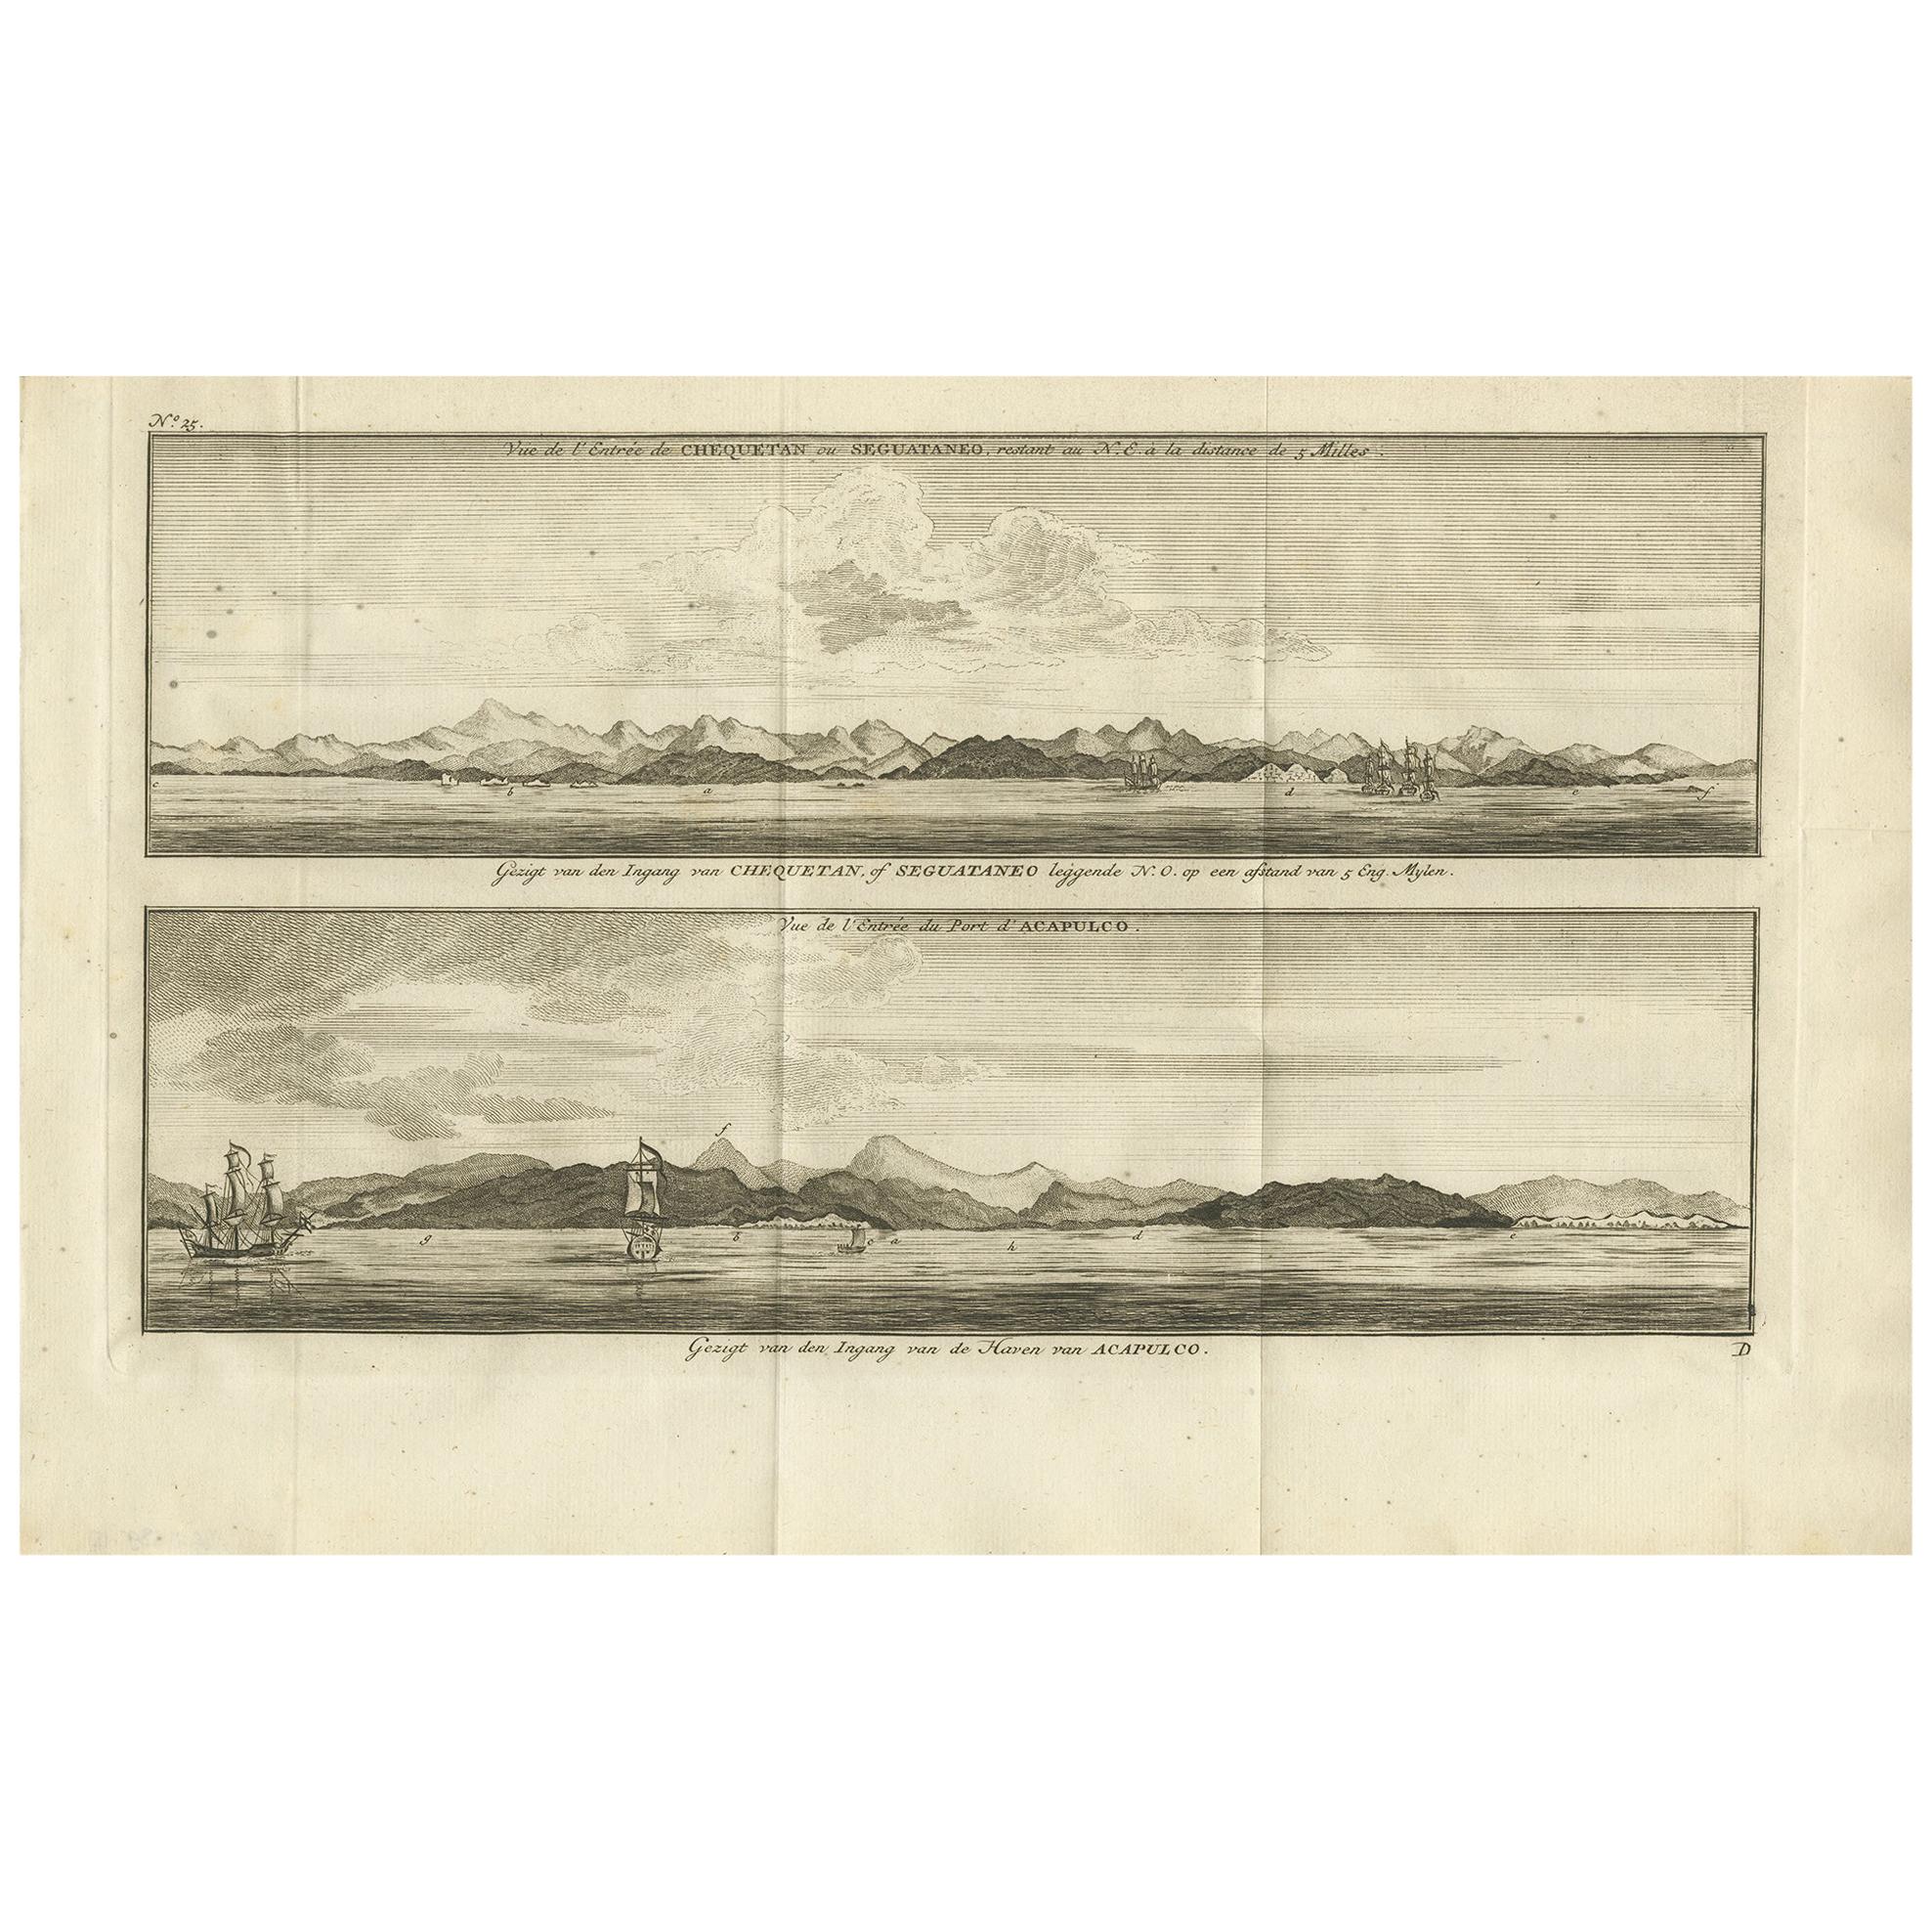 Antique Print of Zihuatanejo and the Harbour of Acapulco by Anson '1749'